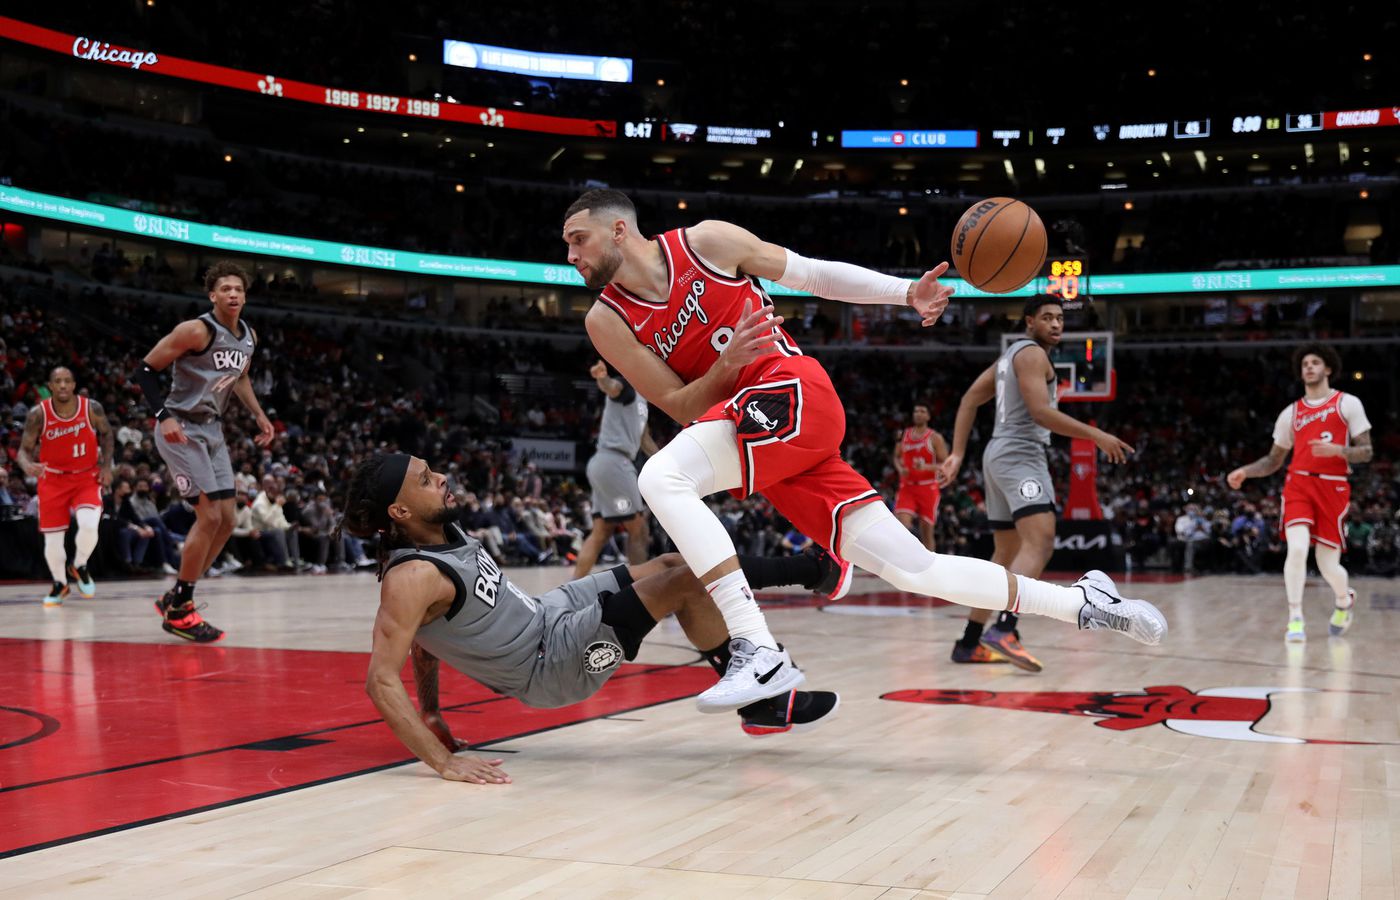 Bulls guard Zach LaVine (8) loses the ball as he drives on Nets guard Patty Mills in the first half.